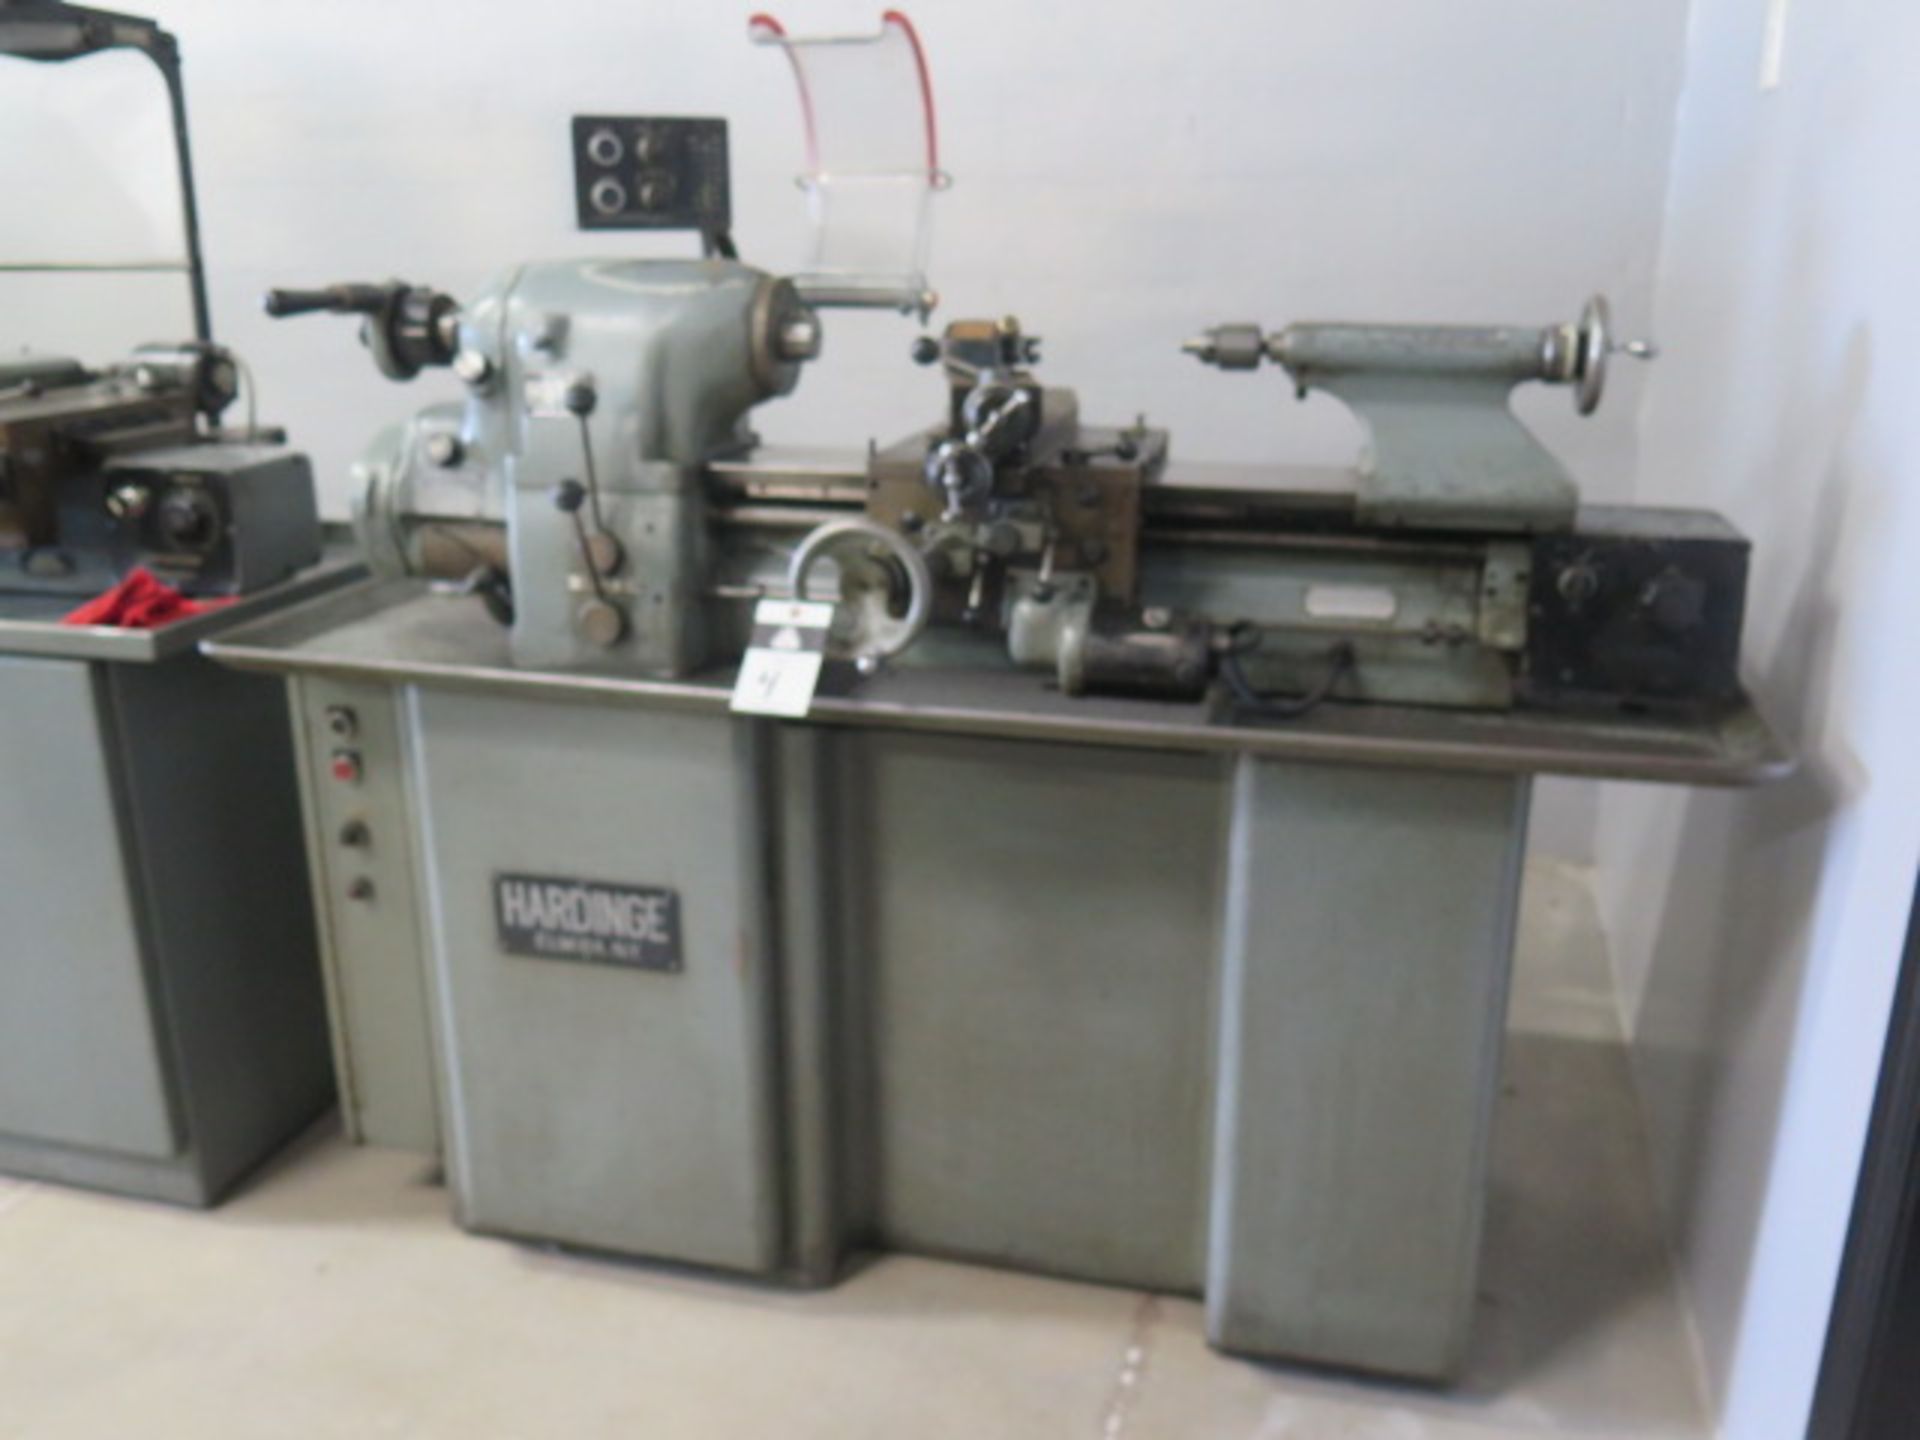 Hardinge HLV-H Wide Bed Tool Room Lathe w/ 125-3000 RPM, Inch Threading, Tailstock, Power Feeds, - Image 2 of 18